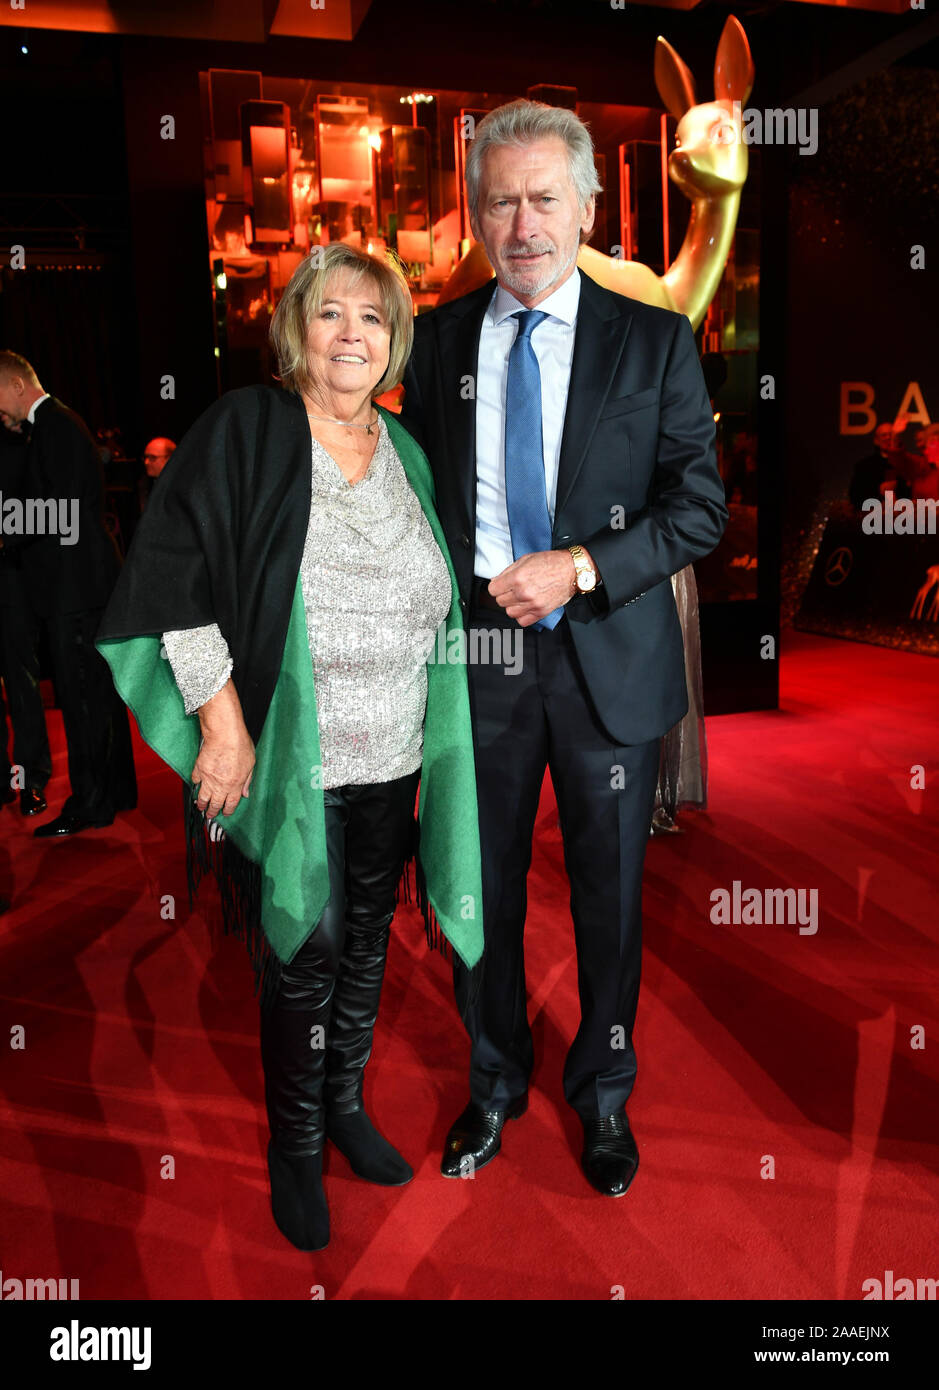 Baden Baden, Germany. 21st Nov, 2019. Paul Breitner, former national soccer player, and his wife Hildegard Breitner come to the 71st Bambi Awards in the Festspielhaus. The Bambi Media Prize has been awarded by Burda-Verlag since 1948. It honors successful and popular celebrities. Credit: Jens Kalaene/dpa/Alamy Live News Stock Photo